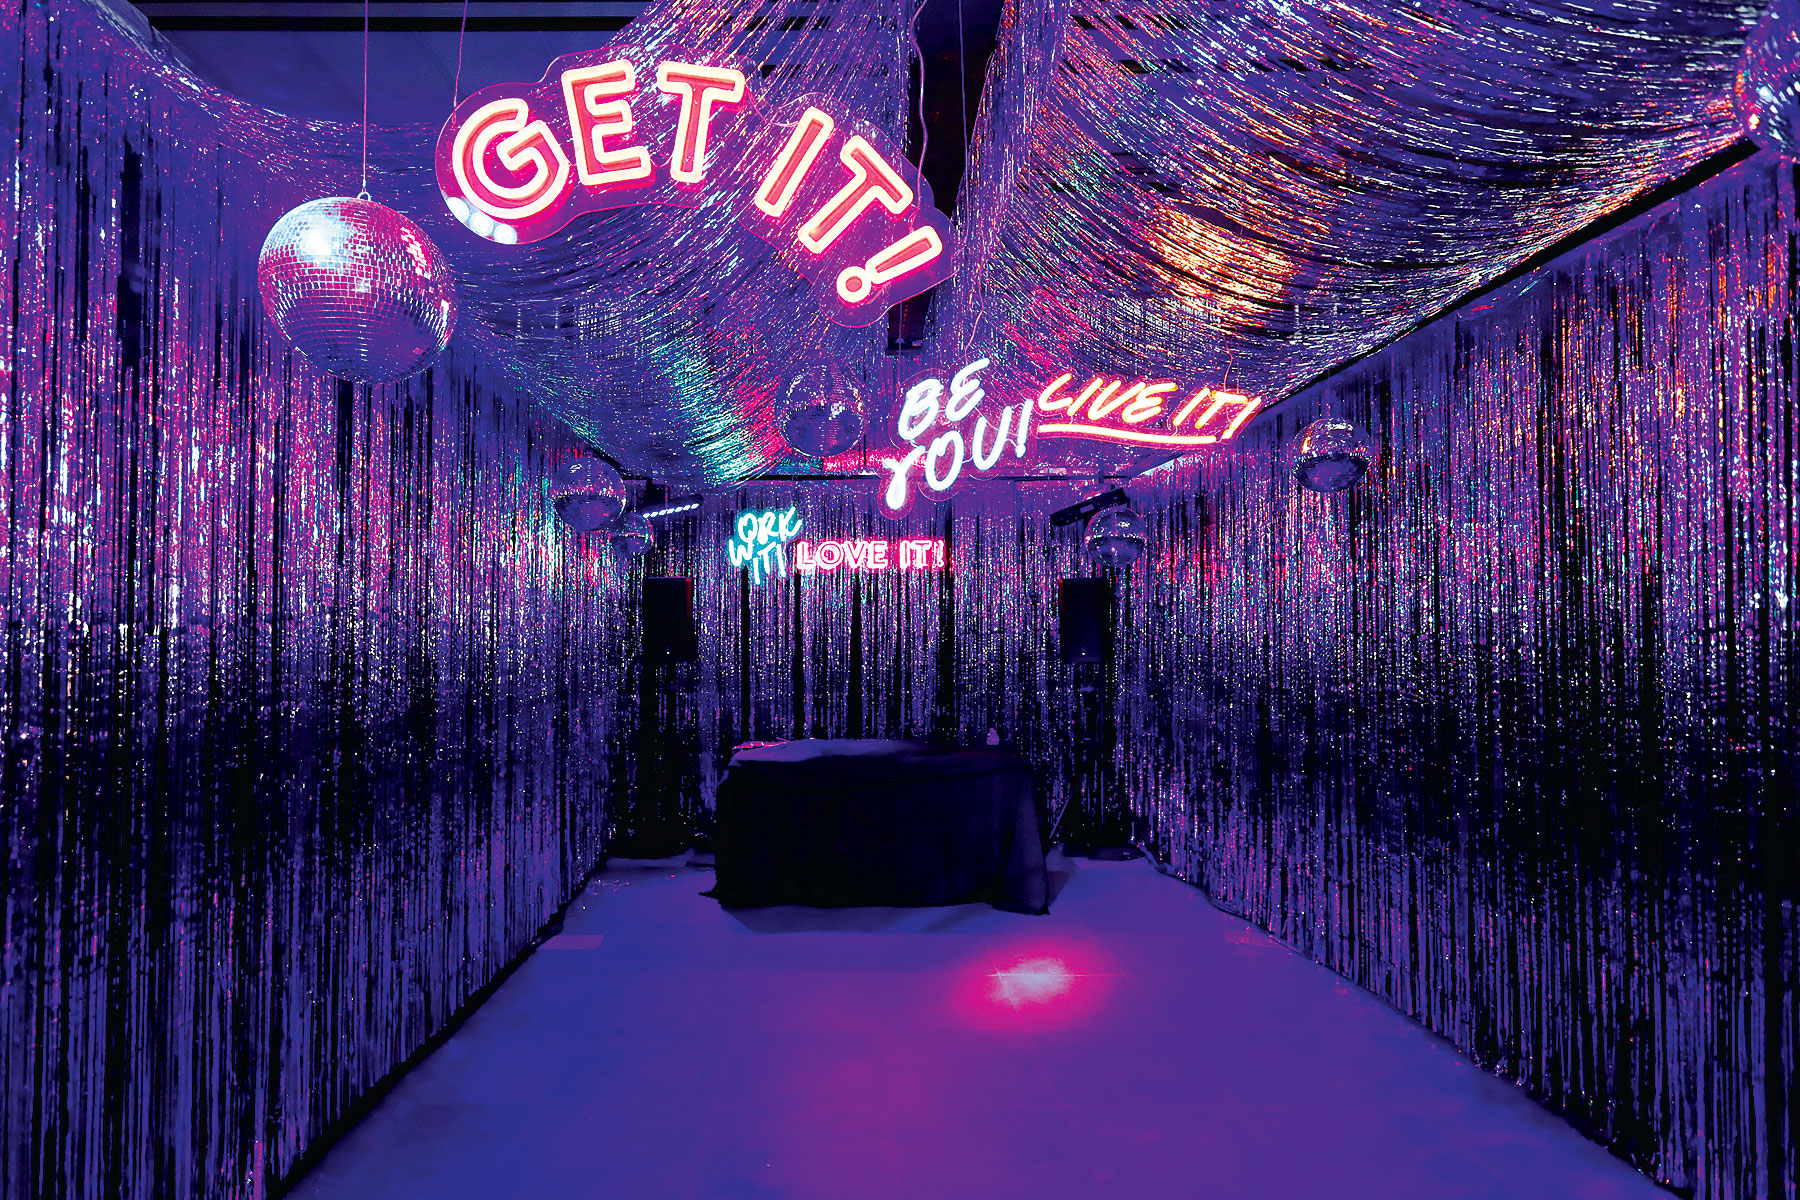 Photograph of 29Rooms courtesy of Getty for Refinery 29’s 29Rooms.